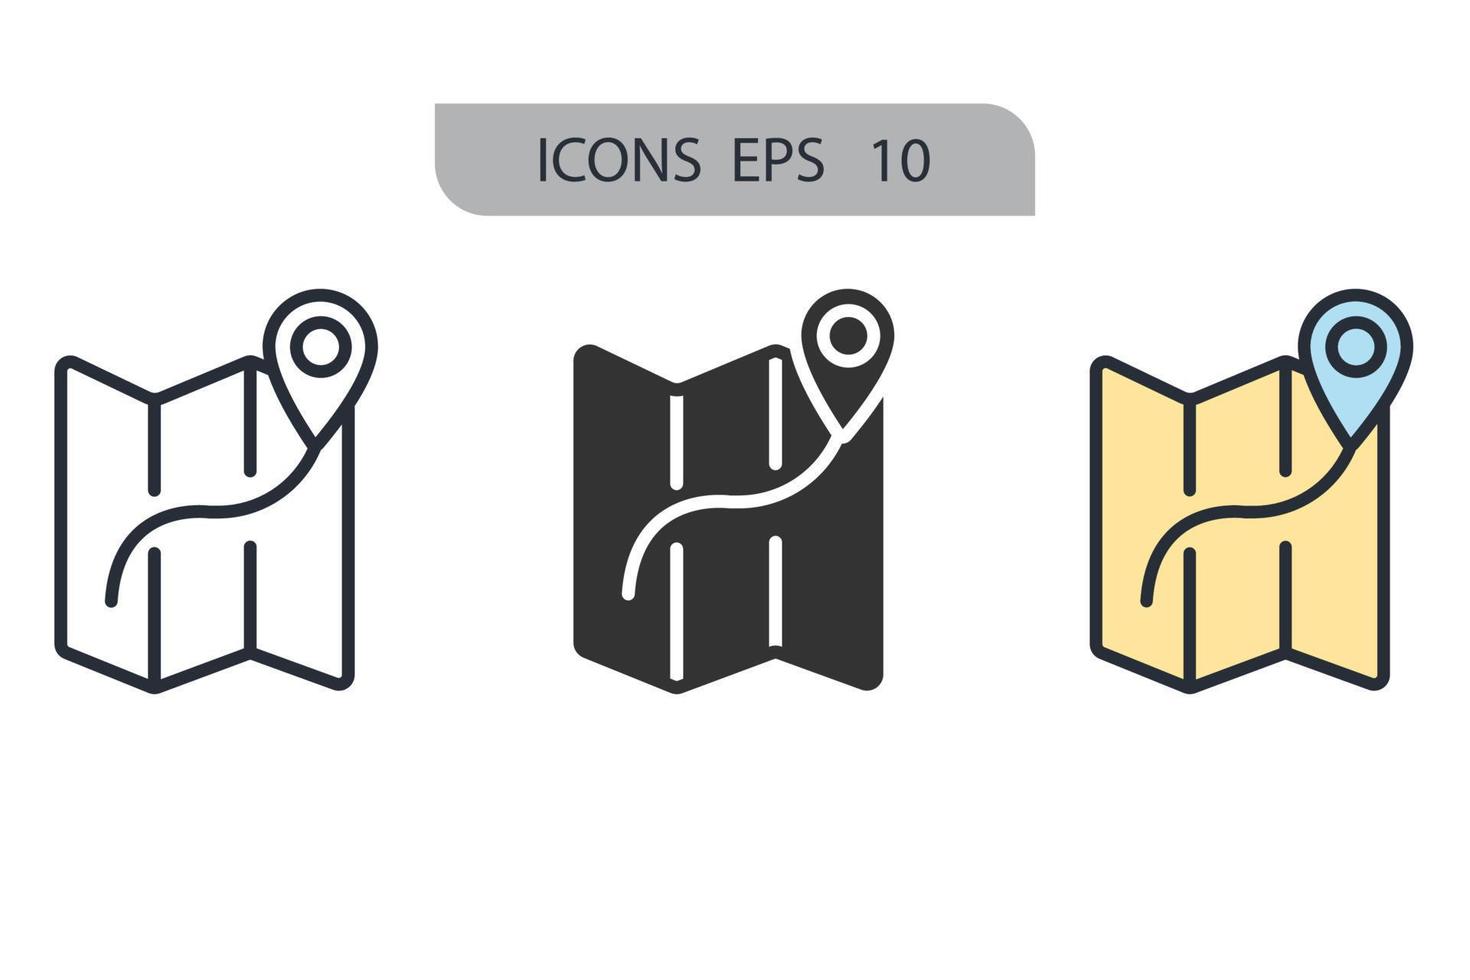 travel icons  symbol vector elements for infographic web